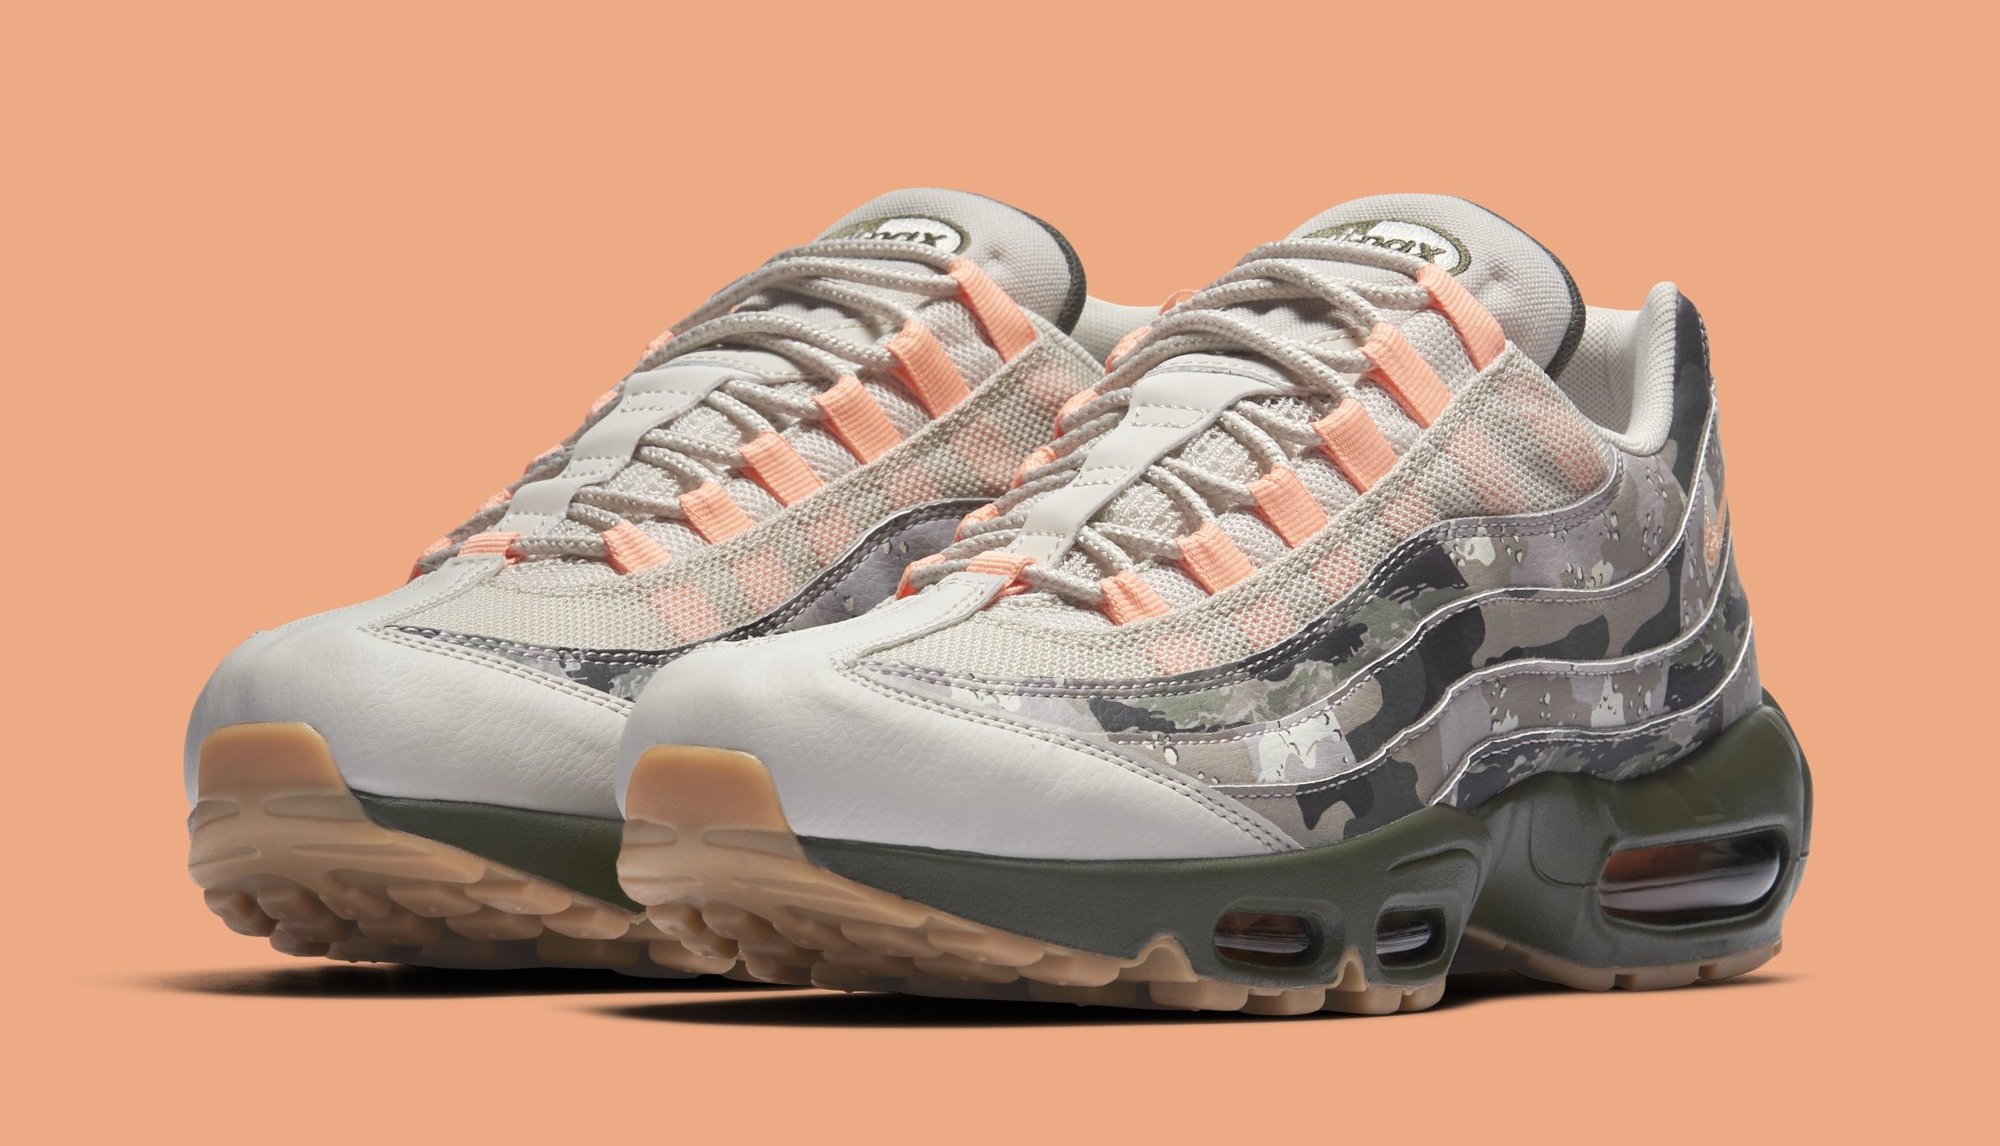 Nike Covered This Max 95 in Desert Camo Complex